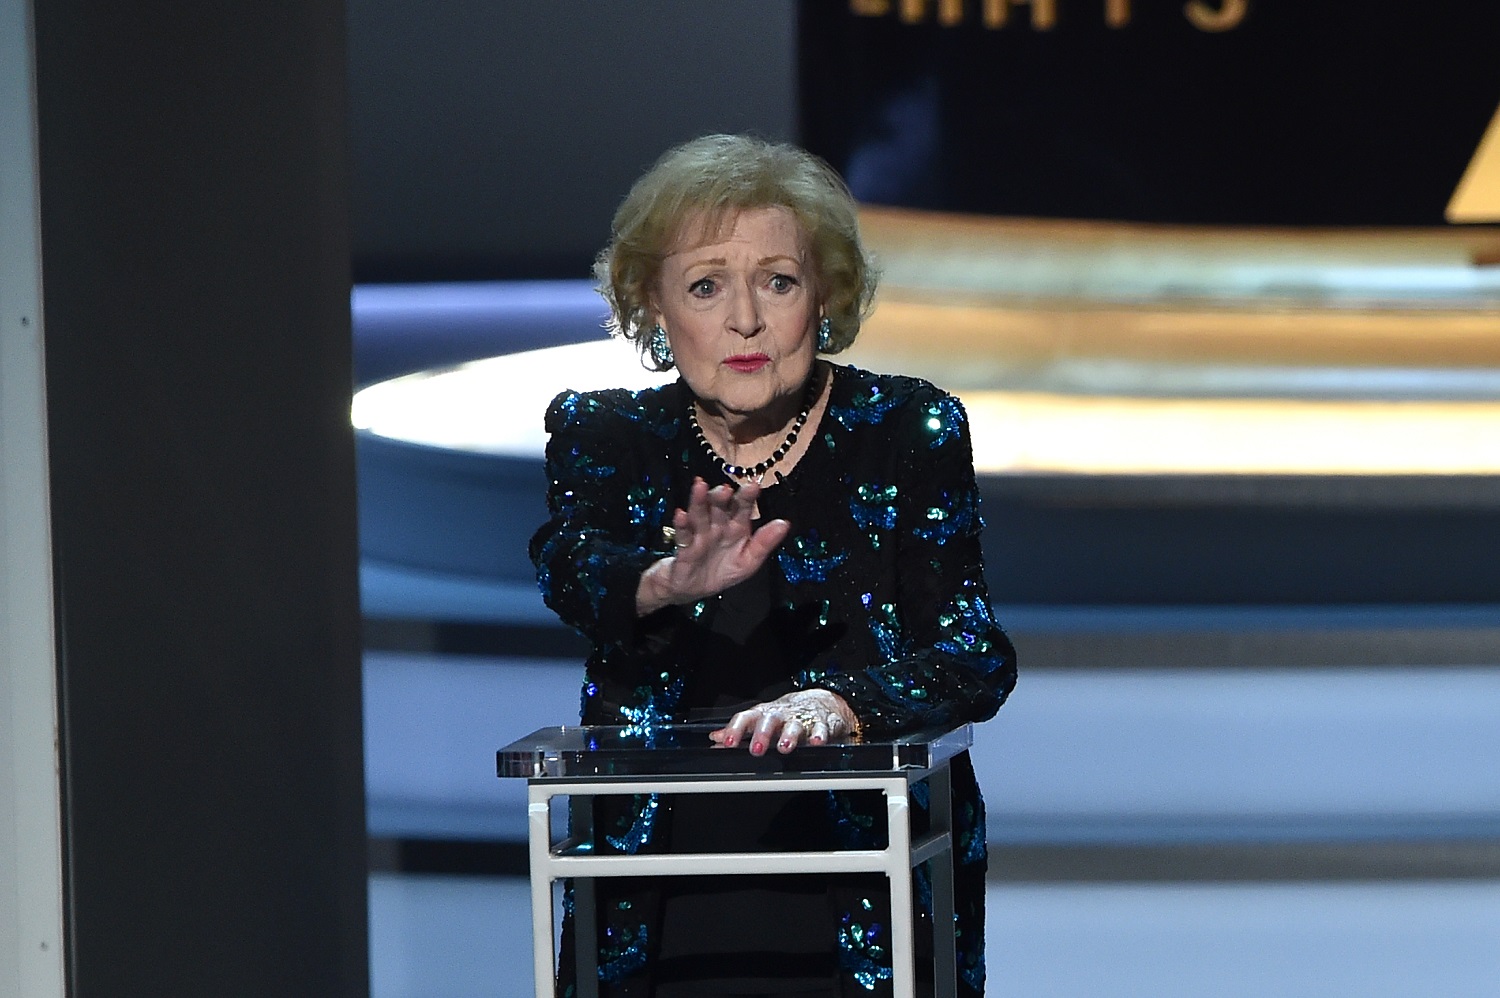 The Day Betty White Took Hilarious Shots at Michael Strahan and Johnny Manziel While Also Pretending to Seduce Roger Goodell